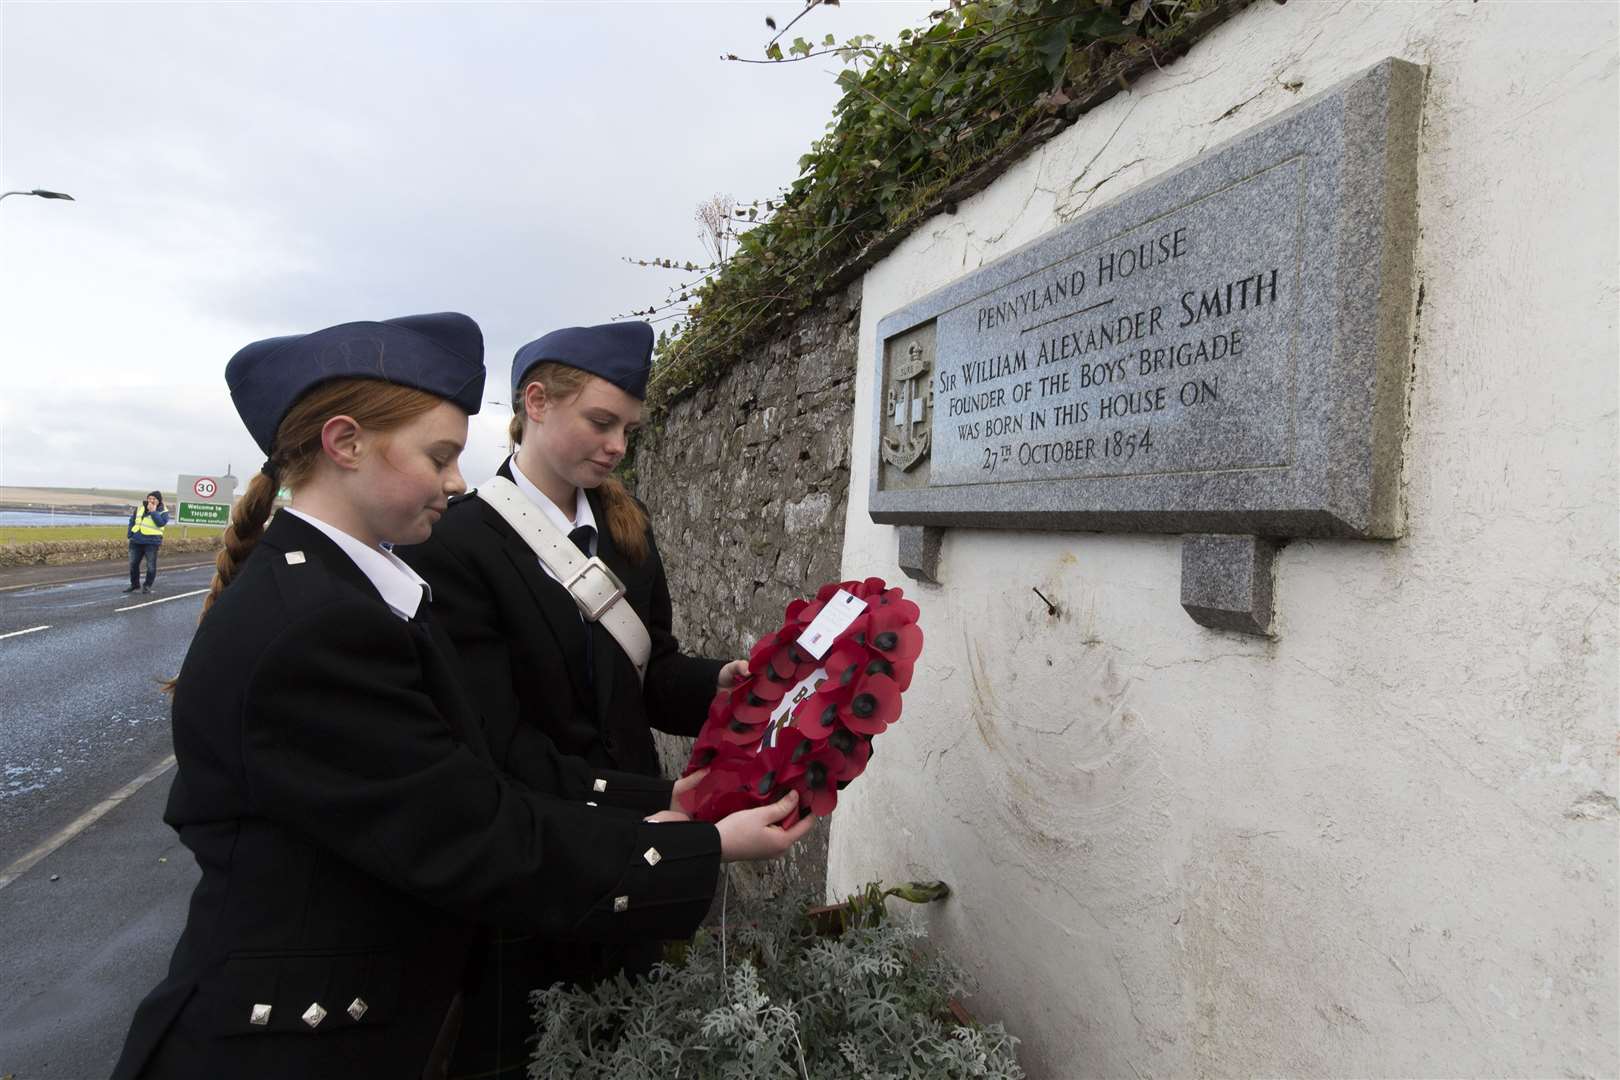 Sisters Clara and Jessica Tickle of the 5th Croydon Company of the Boys Brigade lay a wreath on the memorial for Sir William Alexander Smith, at Pennyland House where he was born. Photos: Robert MacDonald/Northern Studios